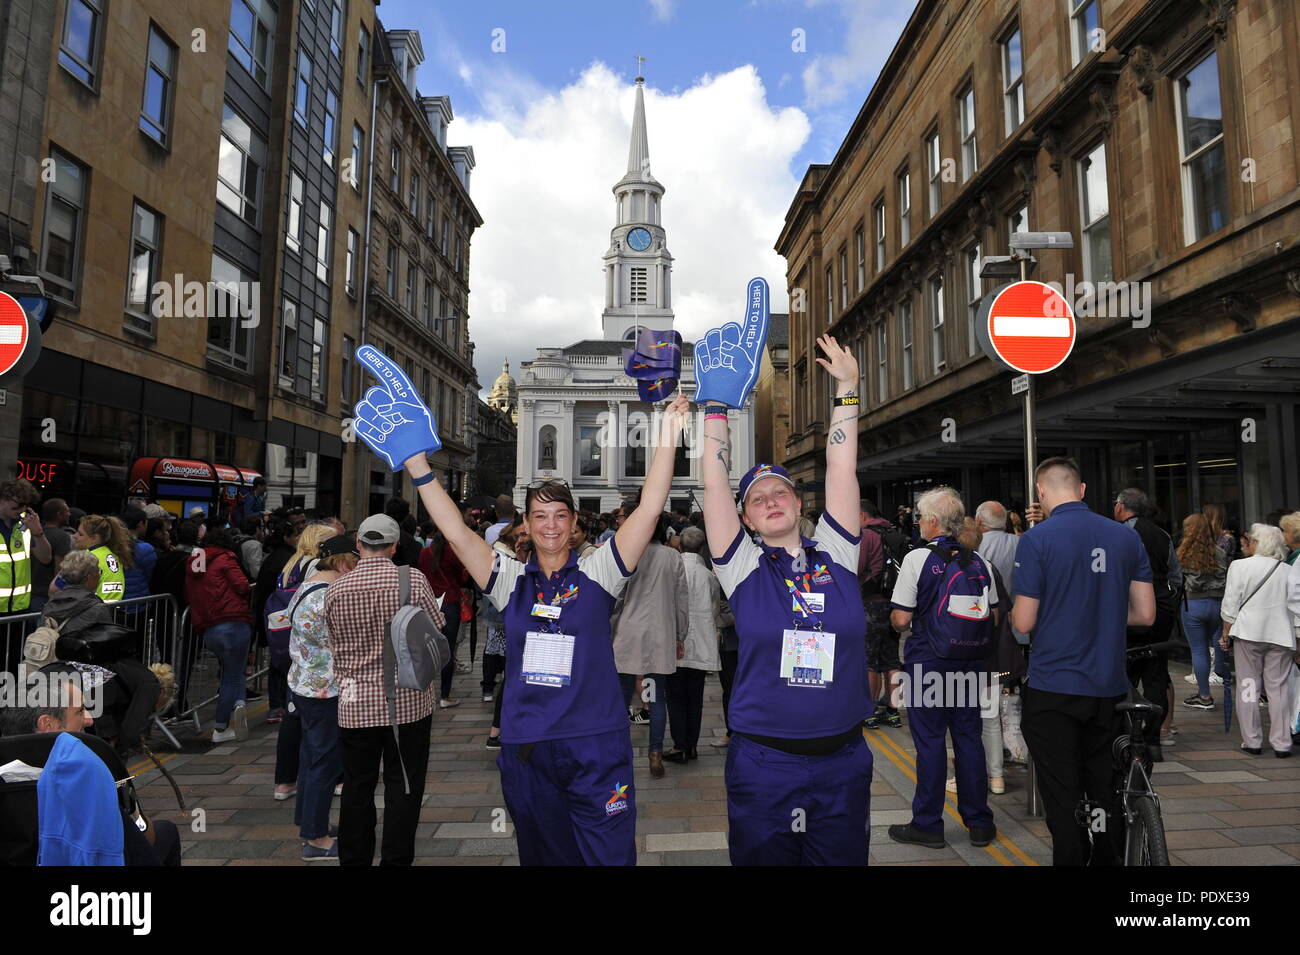 Glasgow, Scotland. 10th August, 2018. Scenes from the merchant city area during the European Championships. Credit: Colin Fisher/Alamy Live News Stock Photo